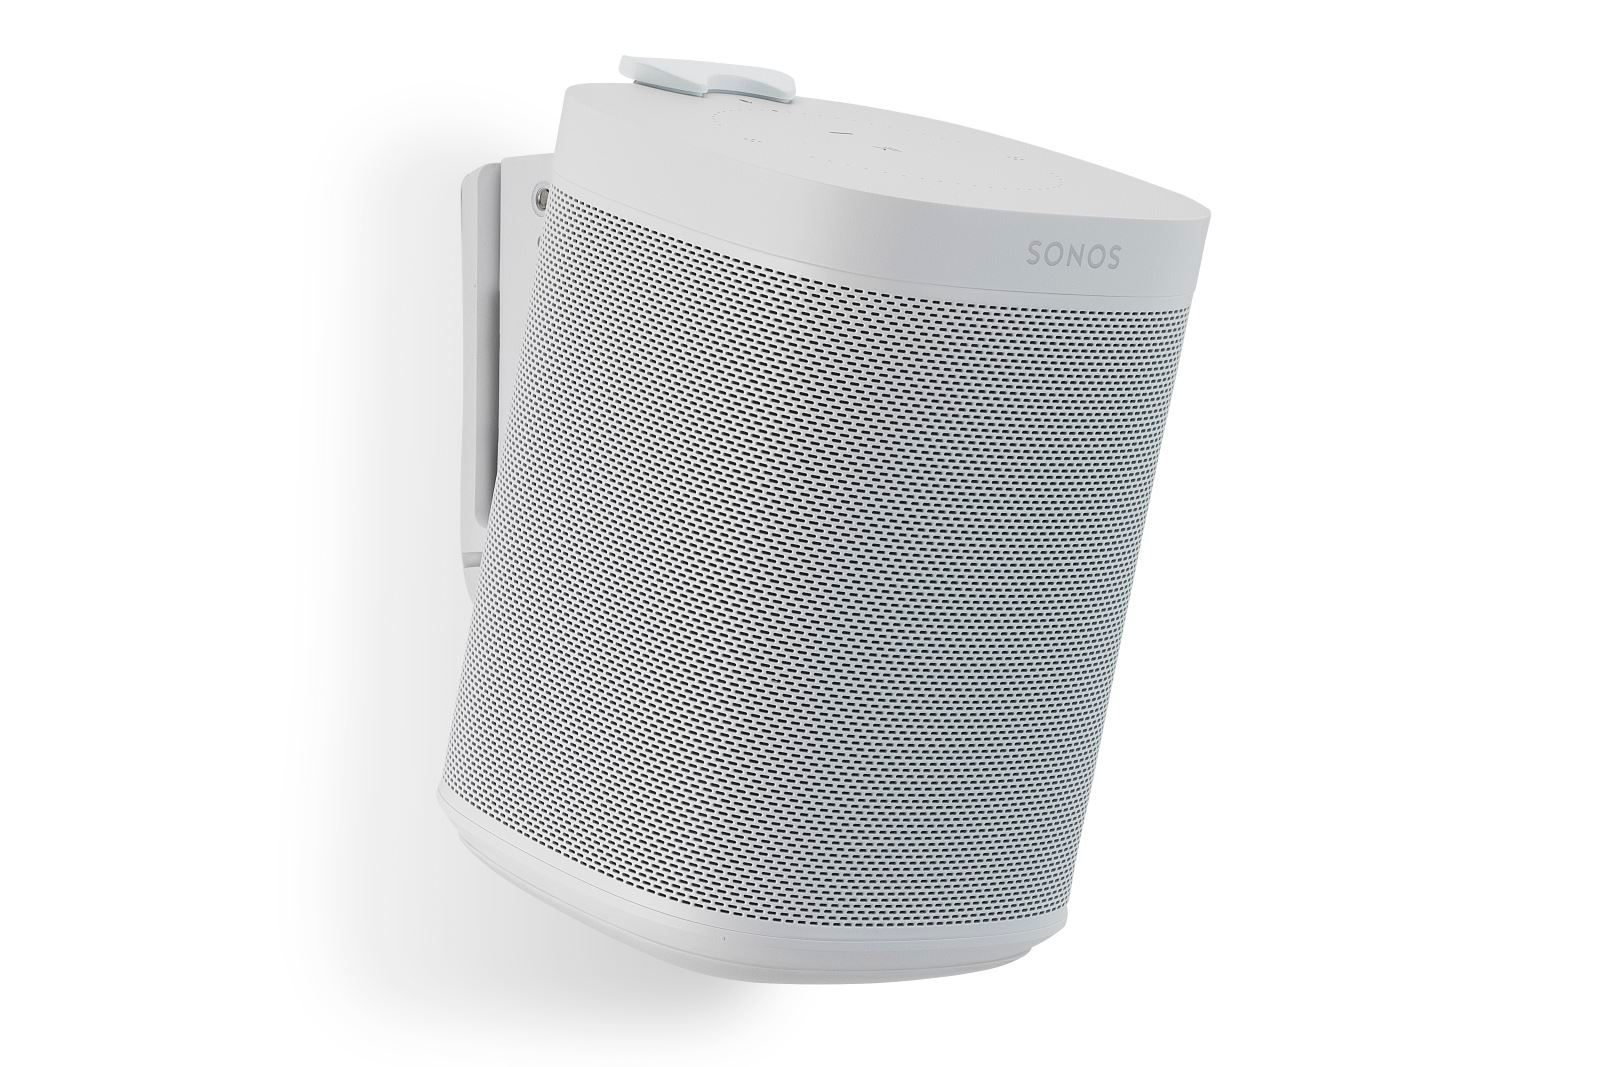 Give Your Sonos A Stylish Boost With These Super Flexson Accessories image 3